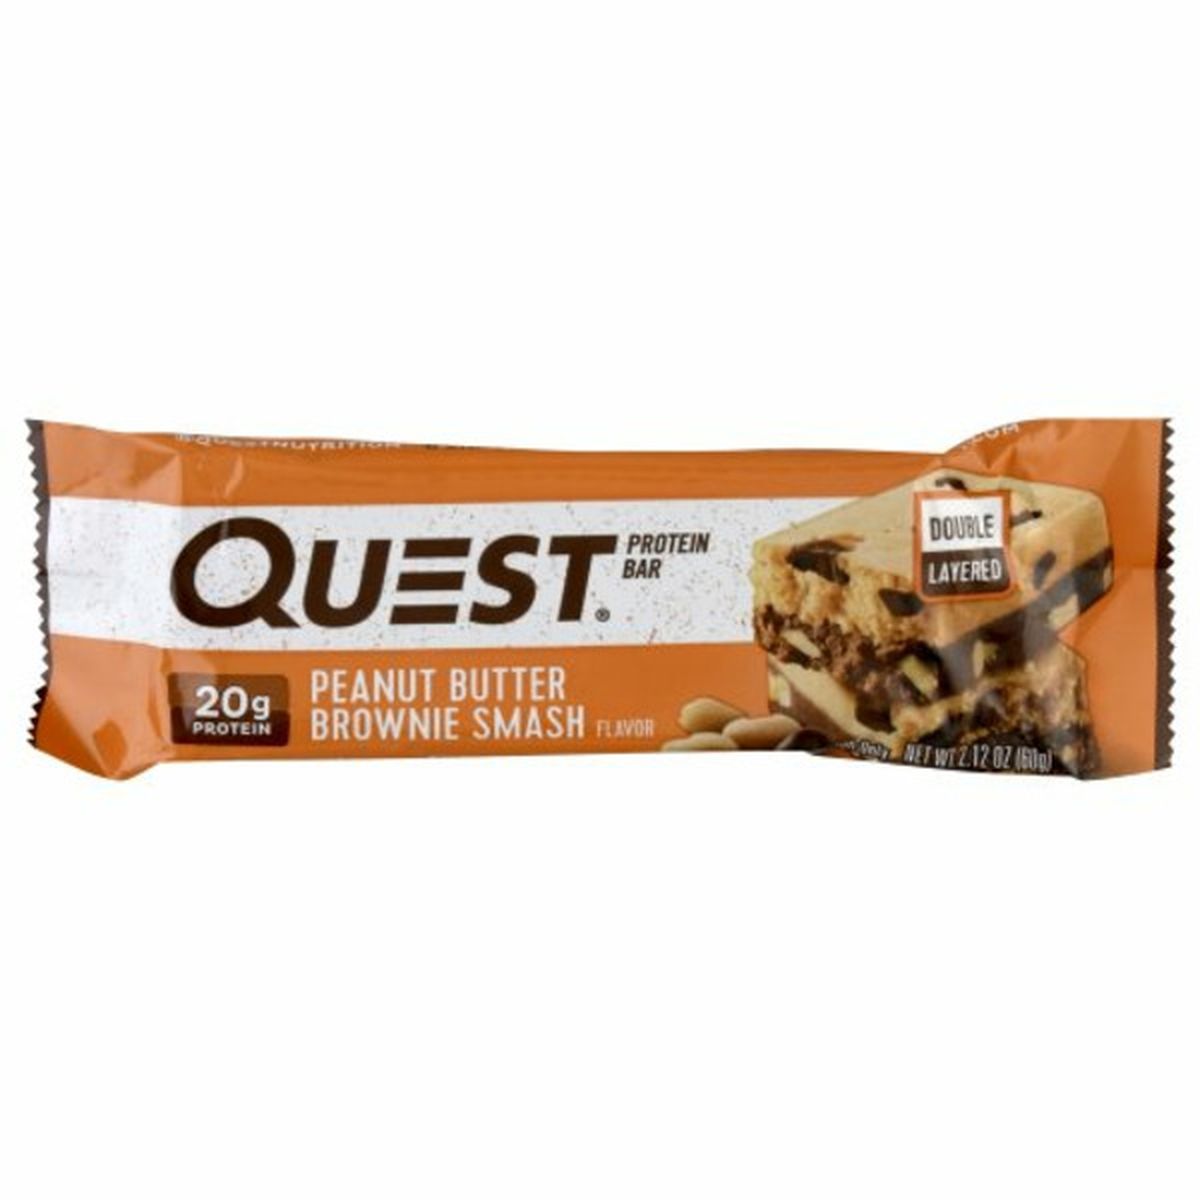 Calories in Quest Protein Bar, Peanut Butter Brownie Smash Flavor